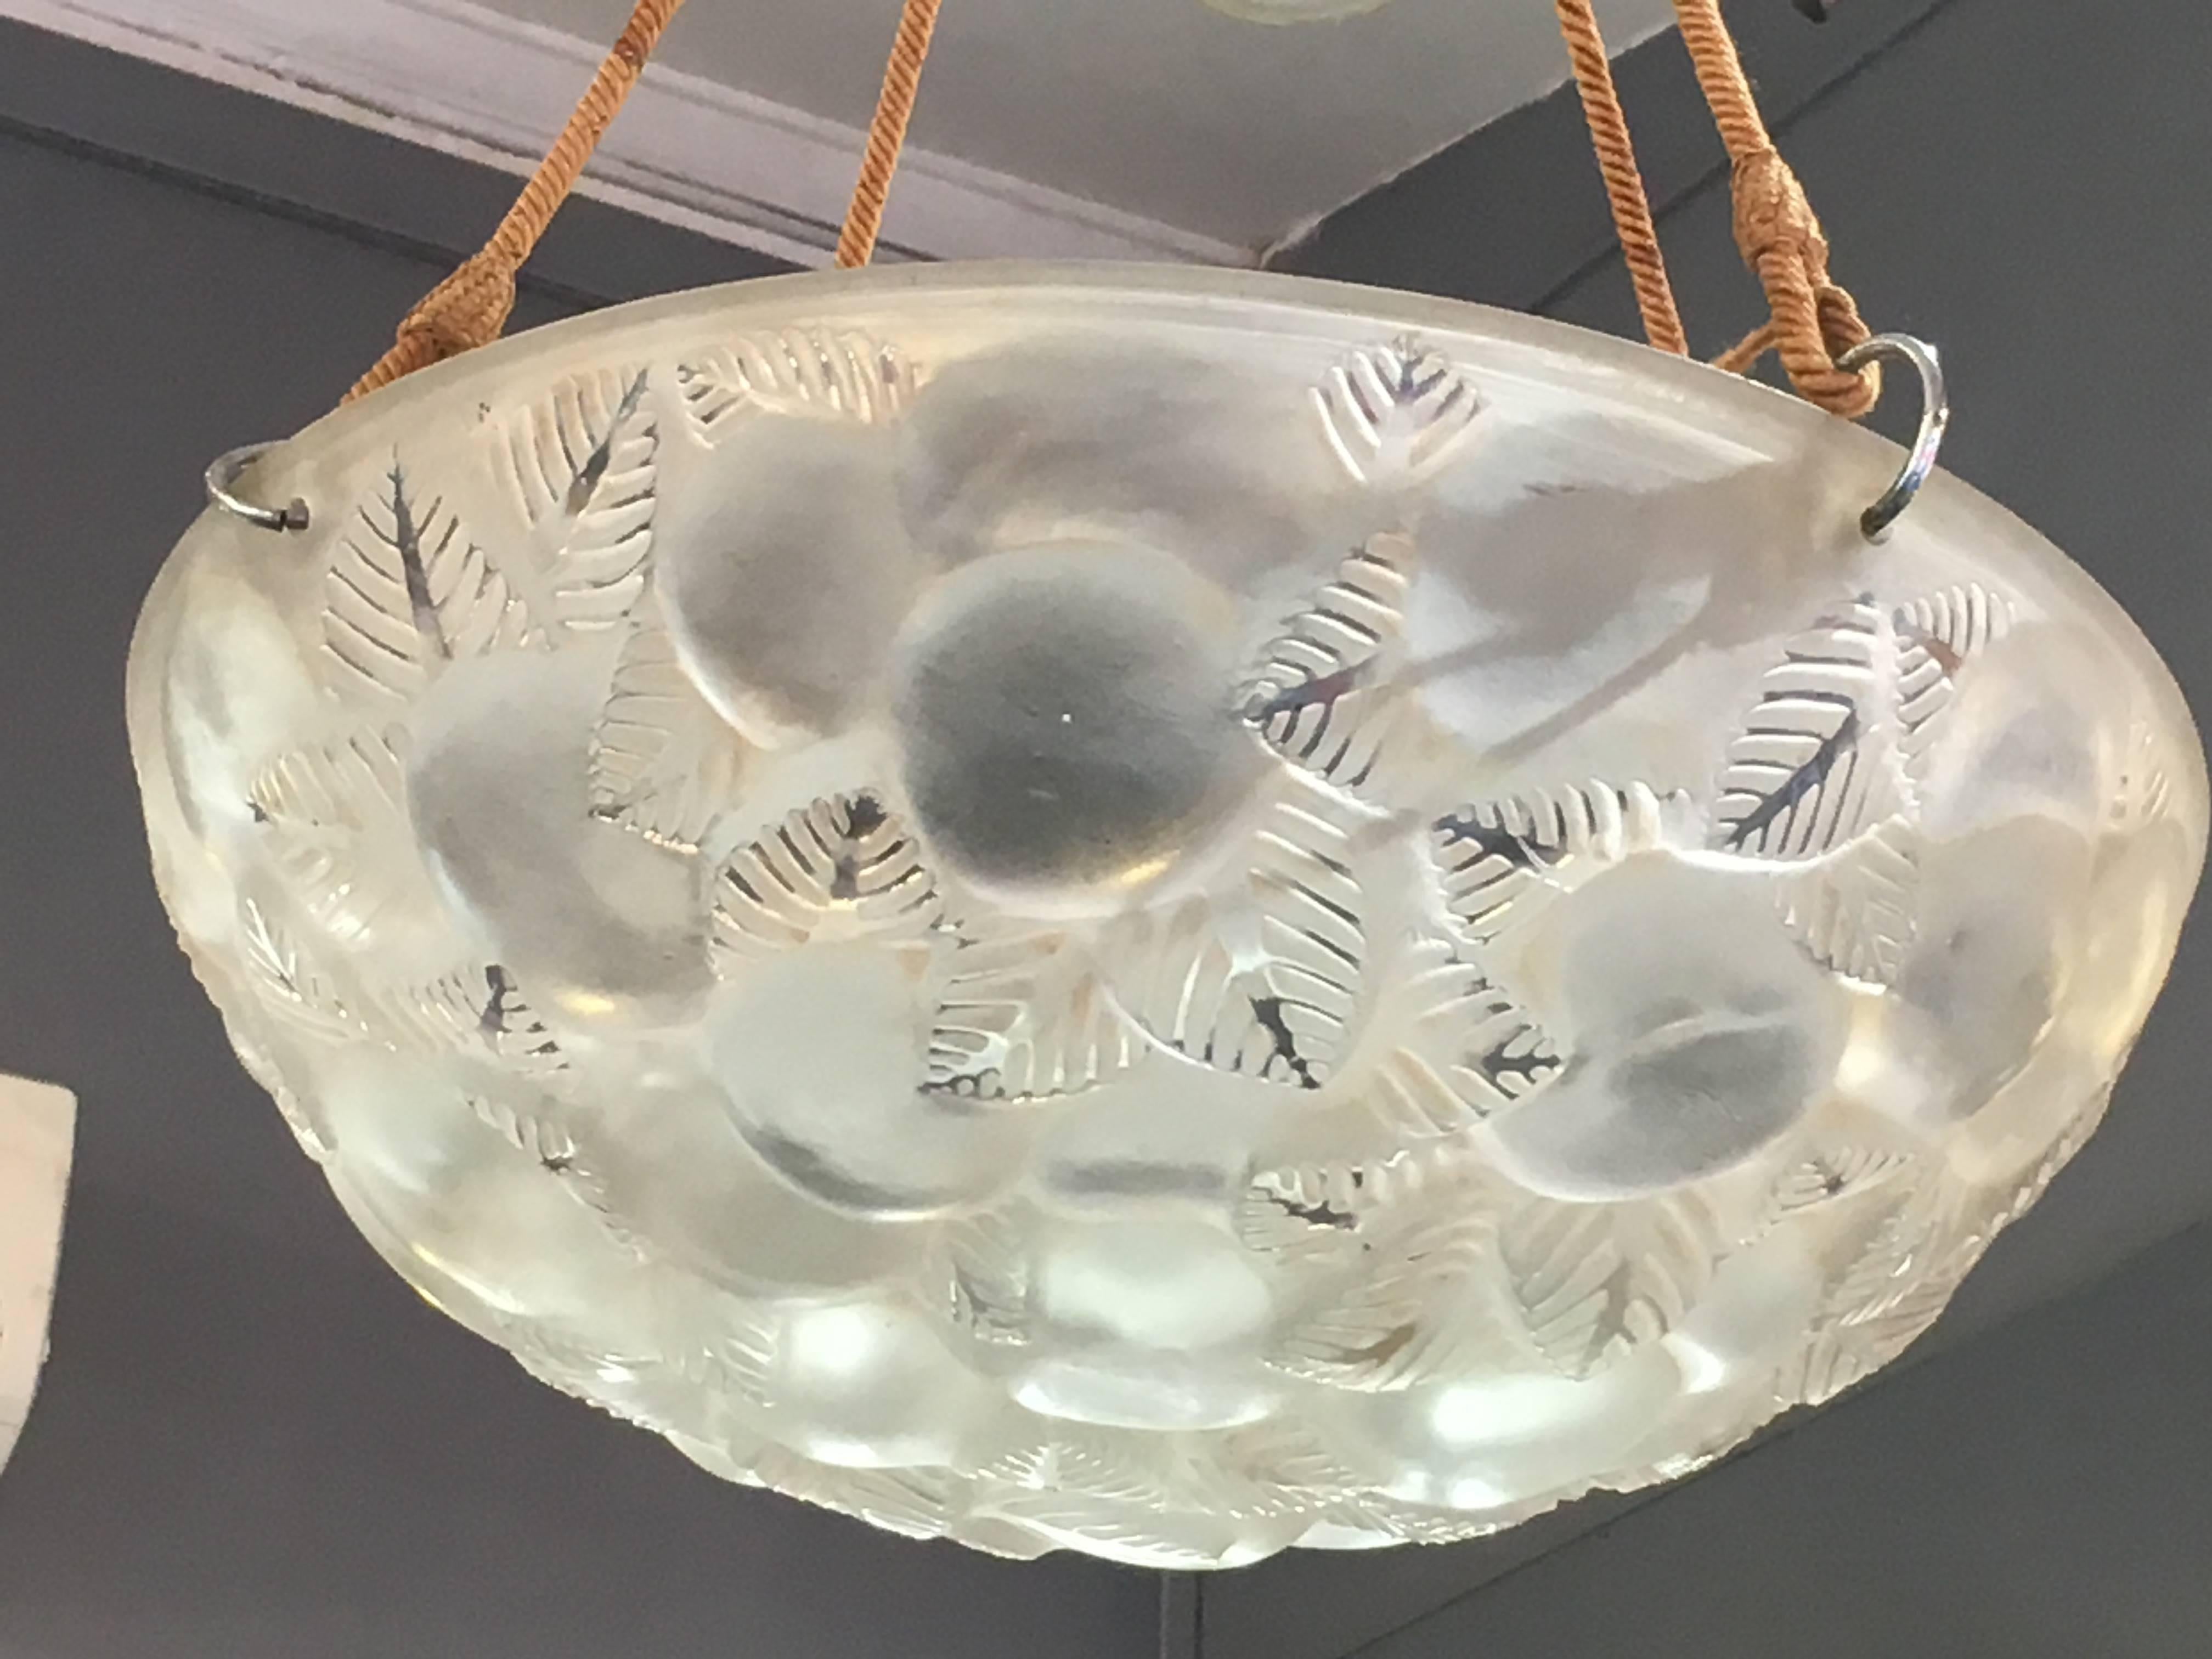 “Lausanne” chandelier, a design created in 1929, in molded glass, diameter: 15” (38 cm.) hanging from four electrified silken cords and glass canopy. Total drop is adjustable